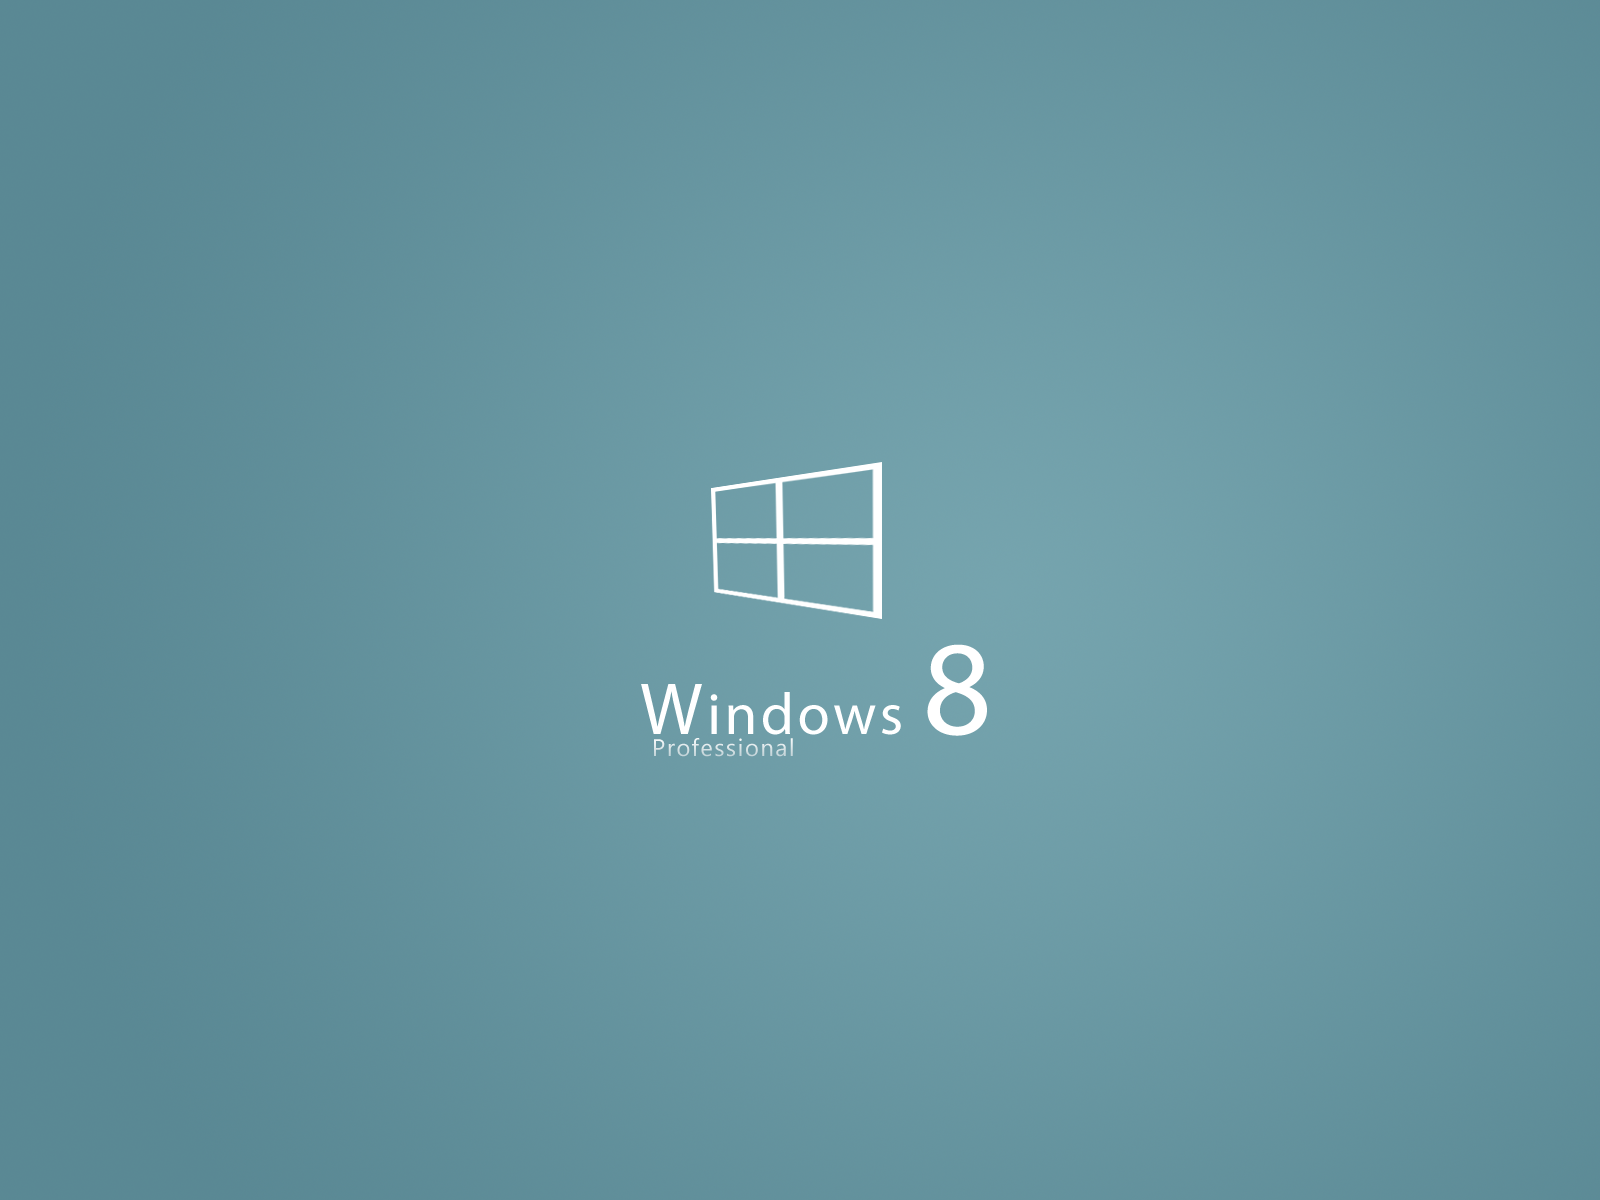 Windows Concept New Logo Wallpaper By Danielskrzypon On